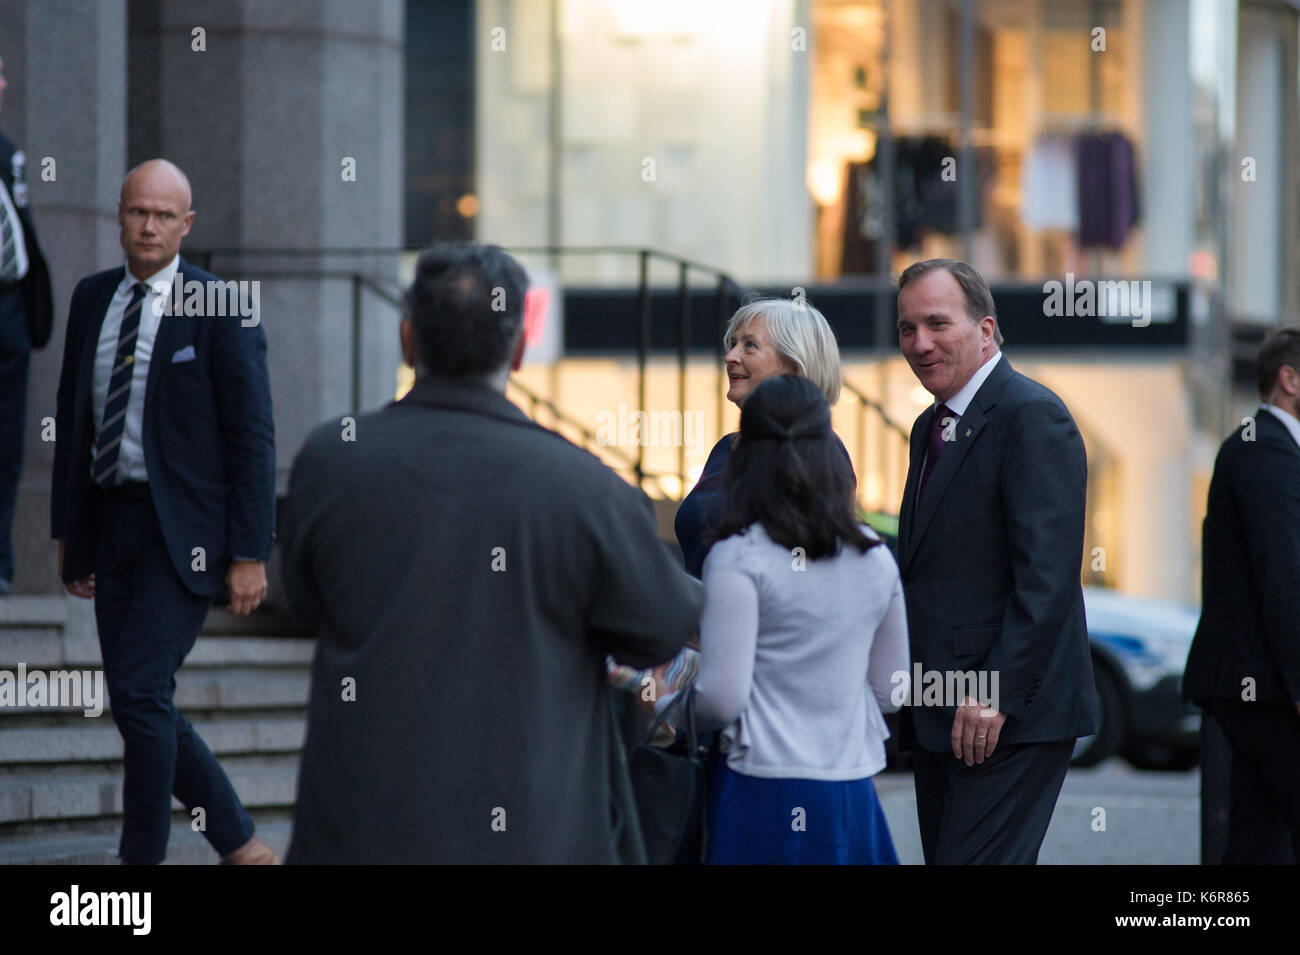 Stockholm, Sweden, 12th September, 2017. Opening of the Riksdag. Tonights concert at Stockholm Concert Hall, due to the opening of the Riksdag. PM Stefan Lofven (S) and his wife Ulla Lofven arrives .Credit: Barbro Bergfeldt/Alamy Live News Stock Photo